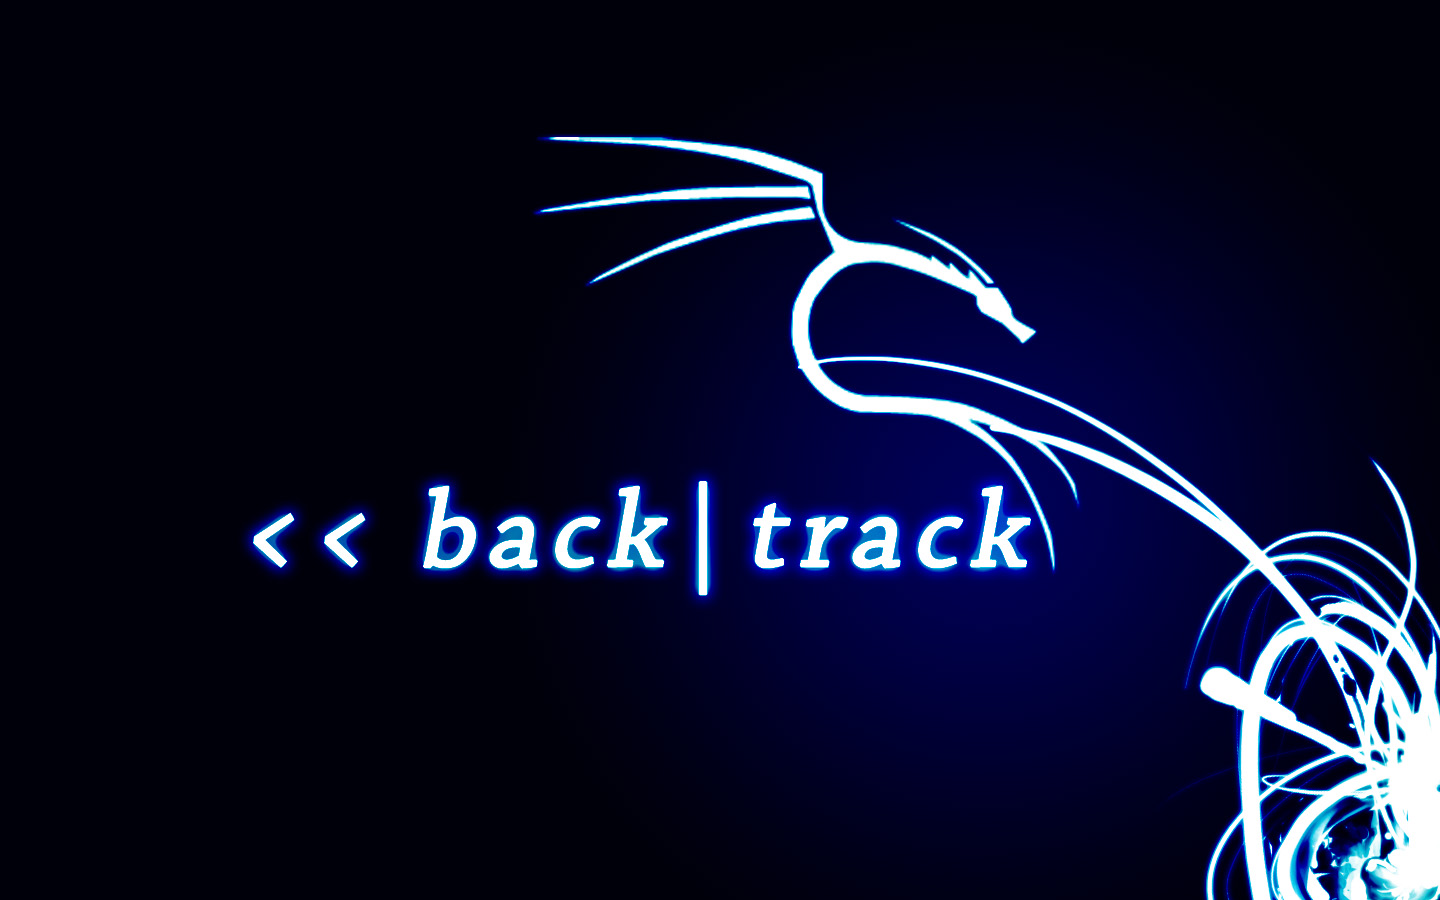 Linux Image Backtrack Wallpaper HD And